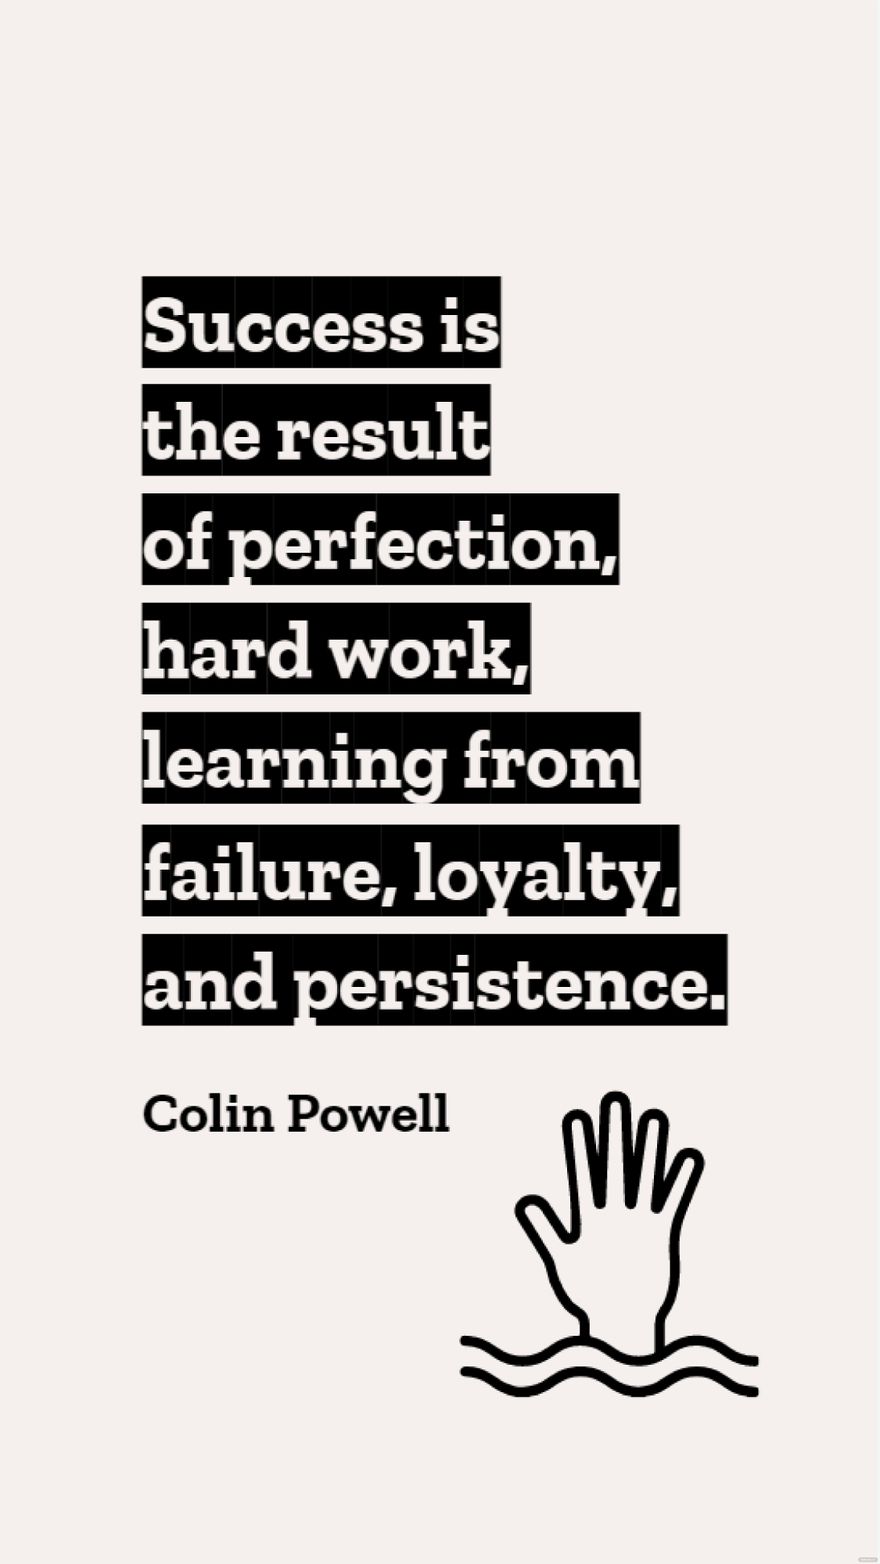 Colin Powell - Success is the result of perfection, hard work, learning from failure, loyalty, and persistence. in JPG